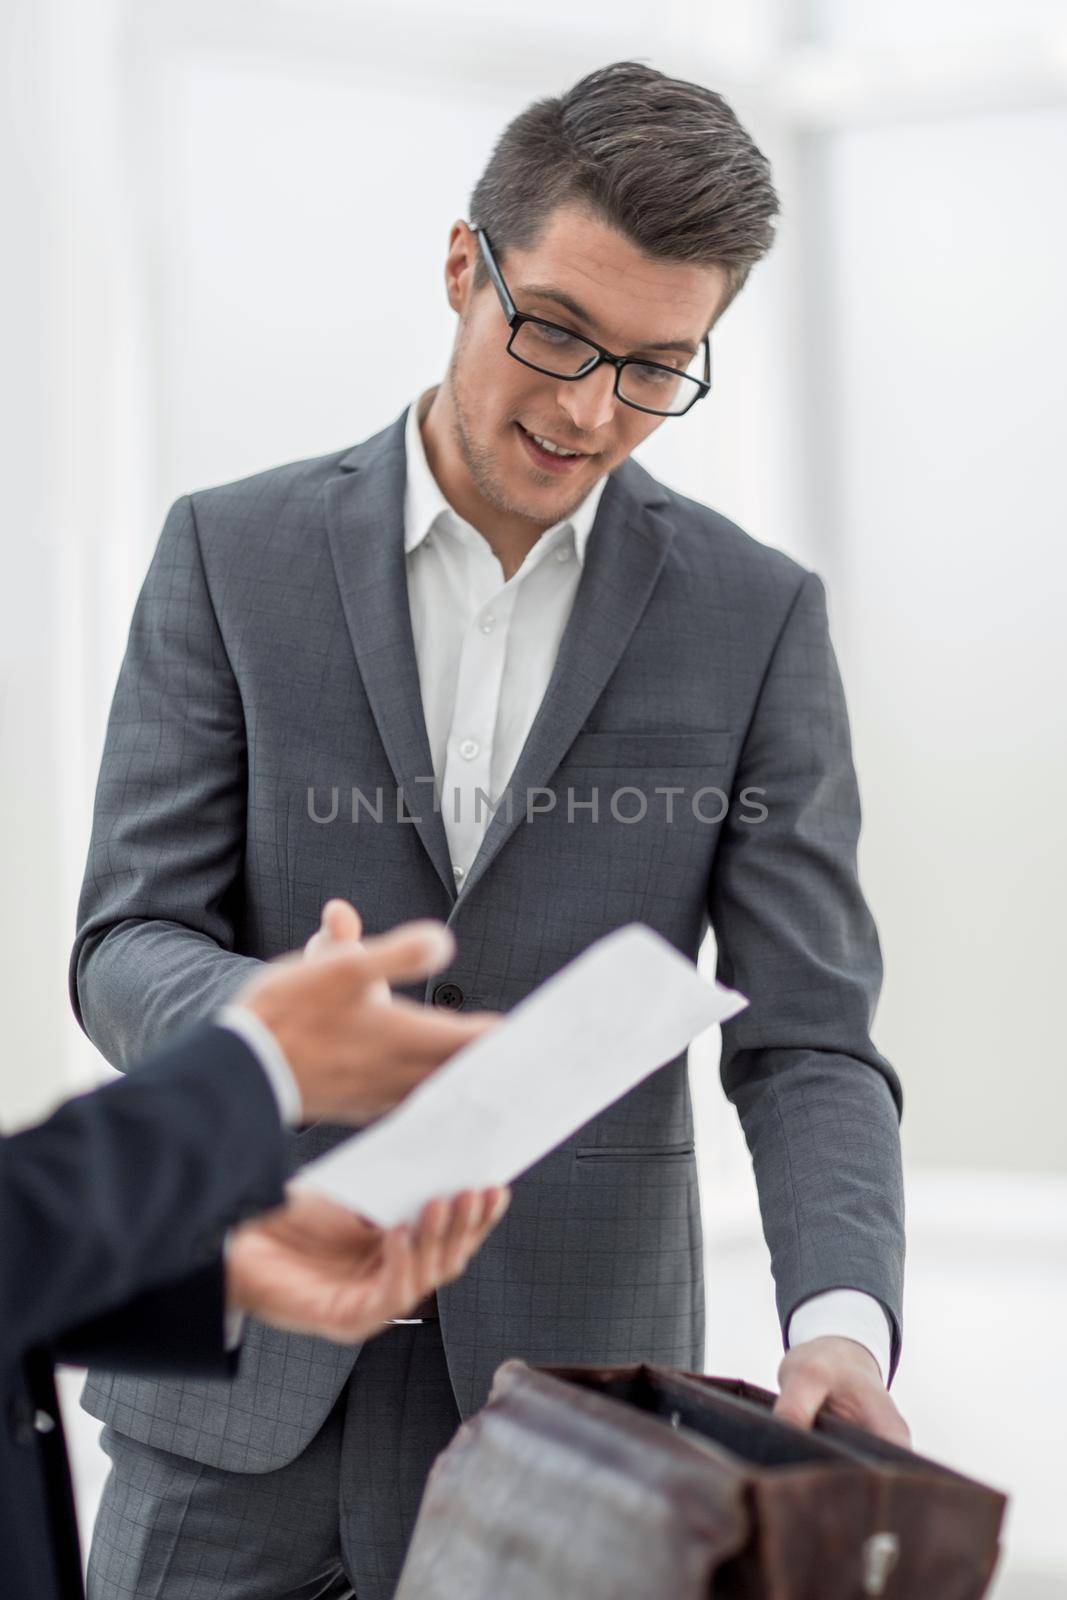 business people discuss business documents.photo with copy space